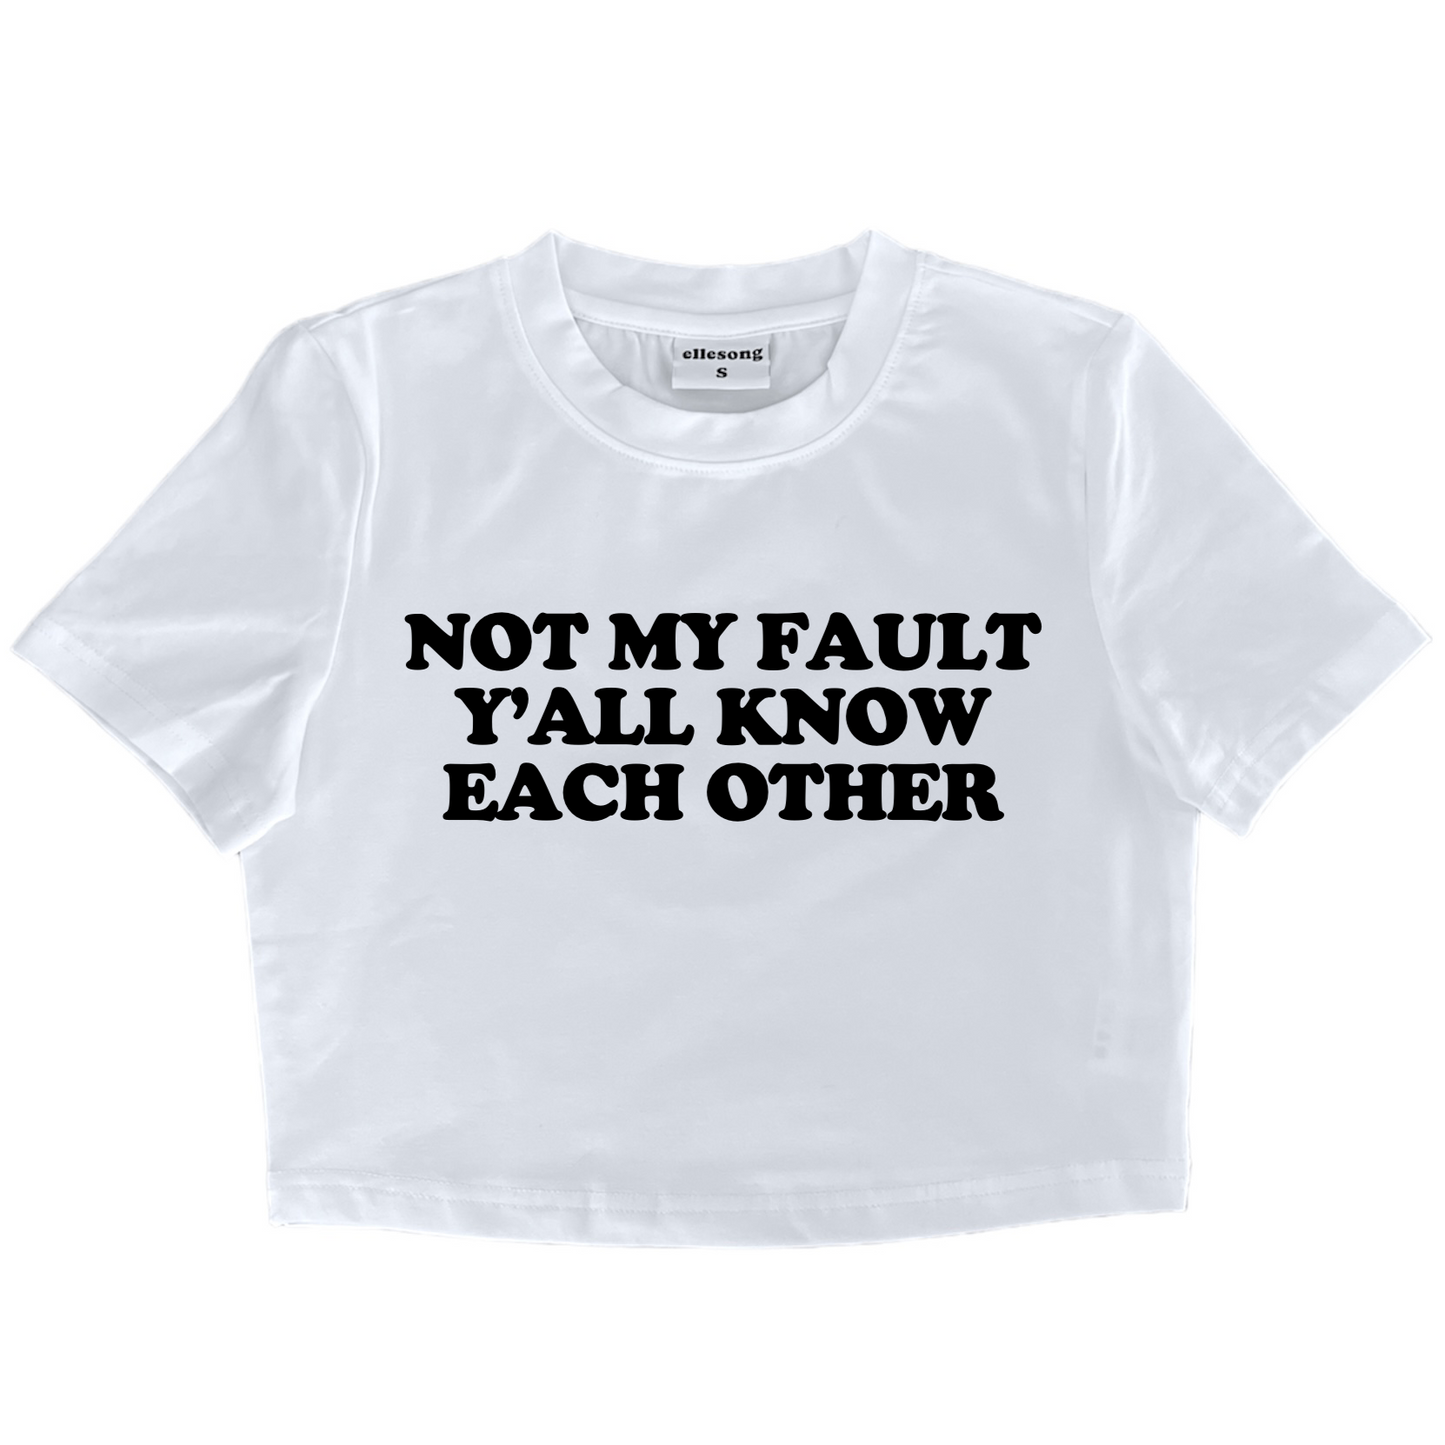 Not My Fault Y’all Know Each Other Baby Tee